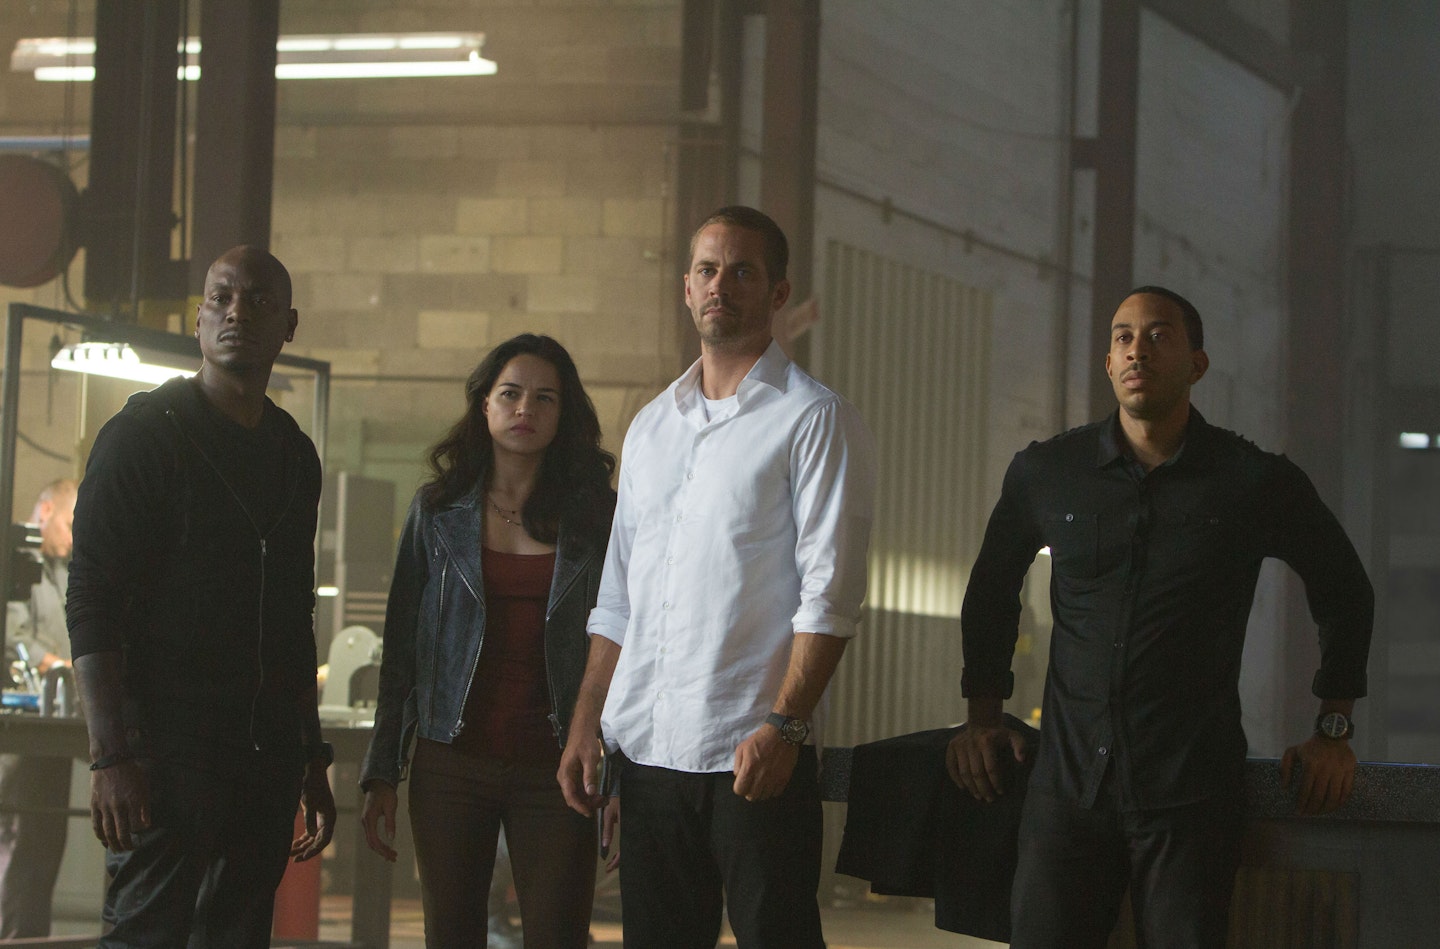 The late Paul Walker on set for Furious 7 with co-stars Tyrese Gibson, Michelle Rodriguez and Ludacris.